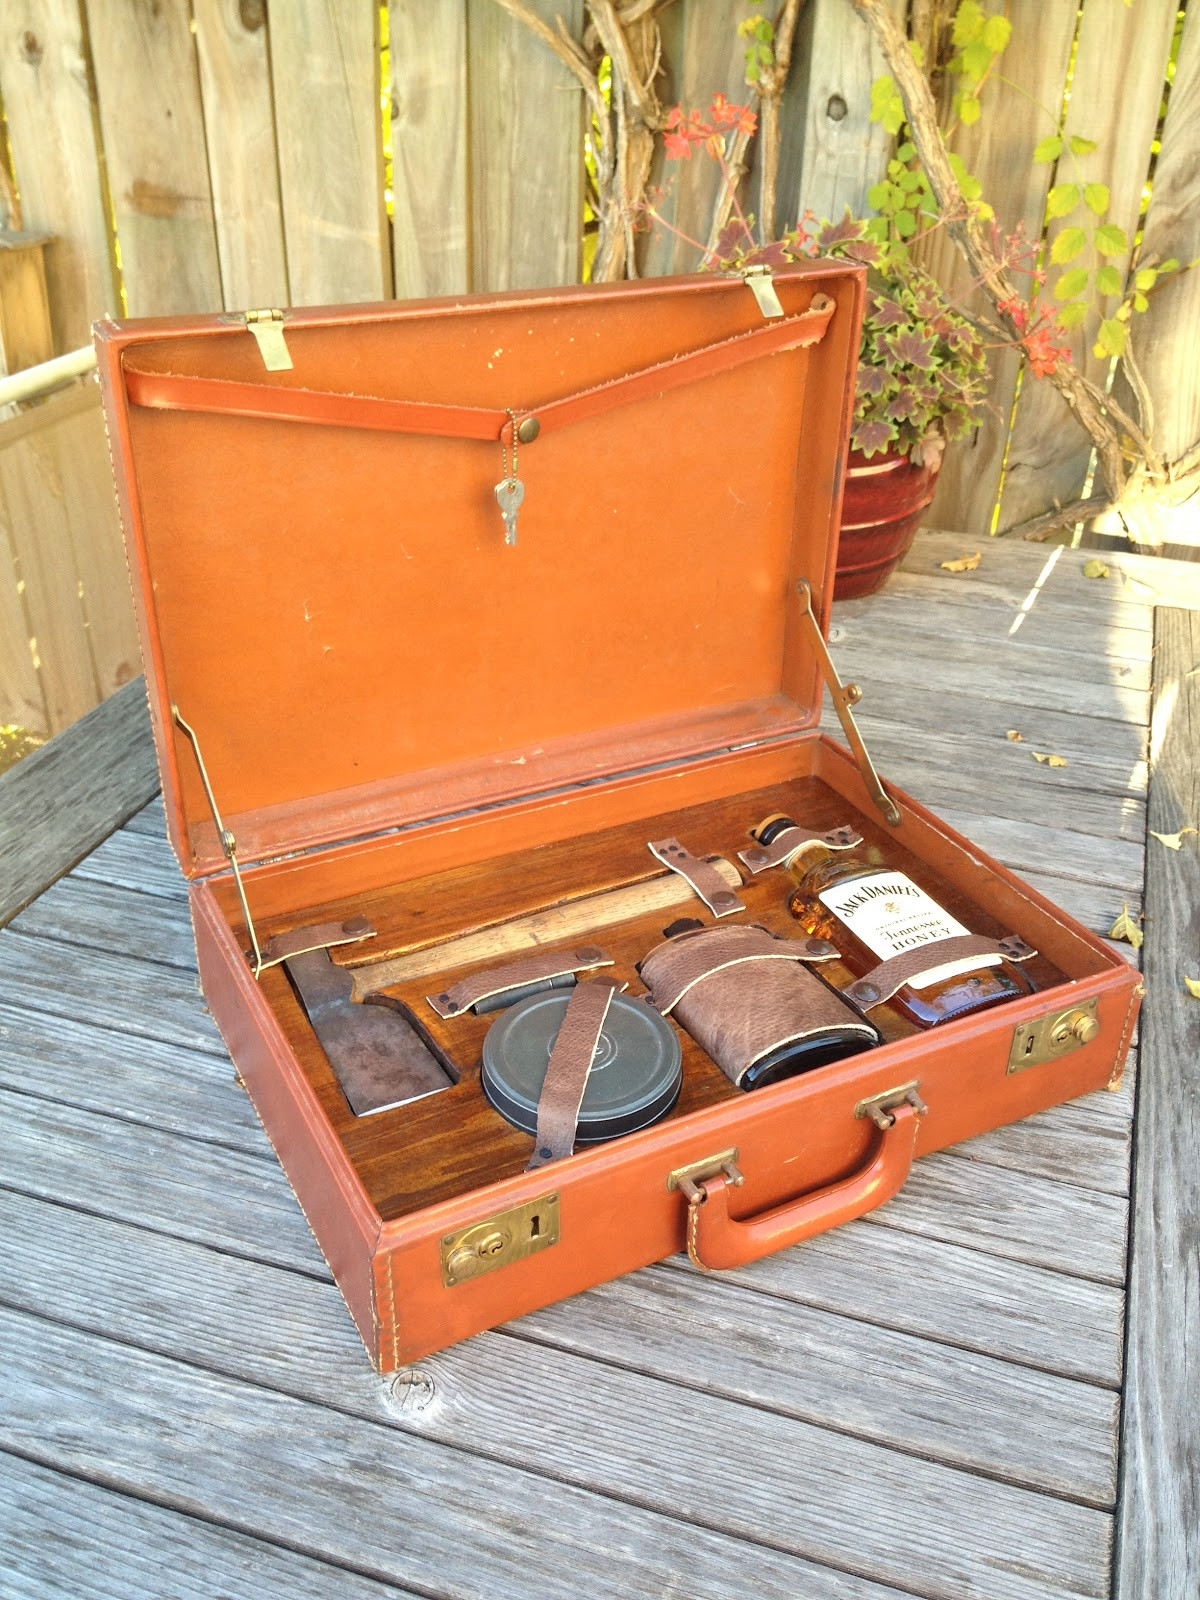 DIY Wood Kits
 Build Wooden Briefcase Kit DIY roubo woodworking bench